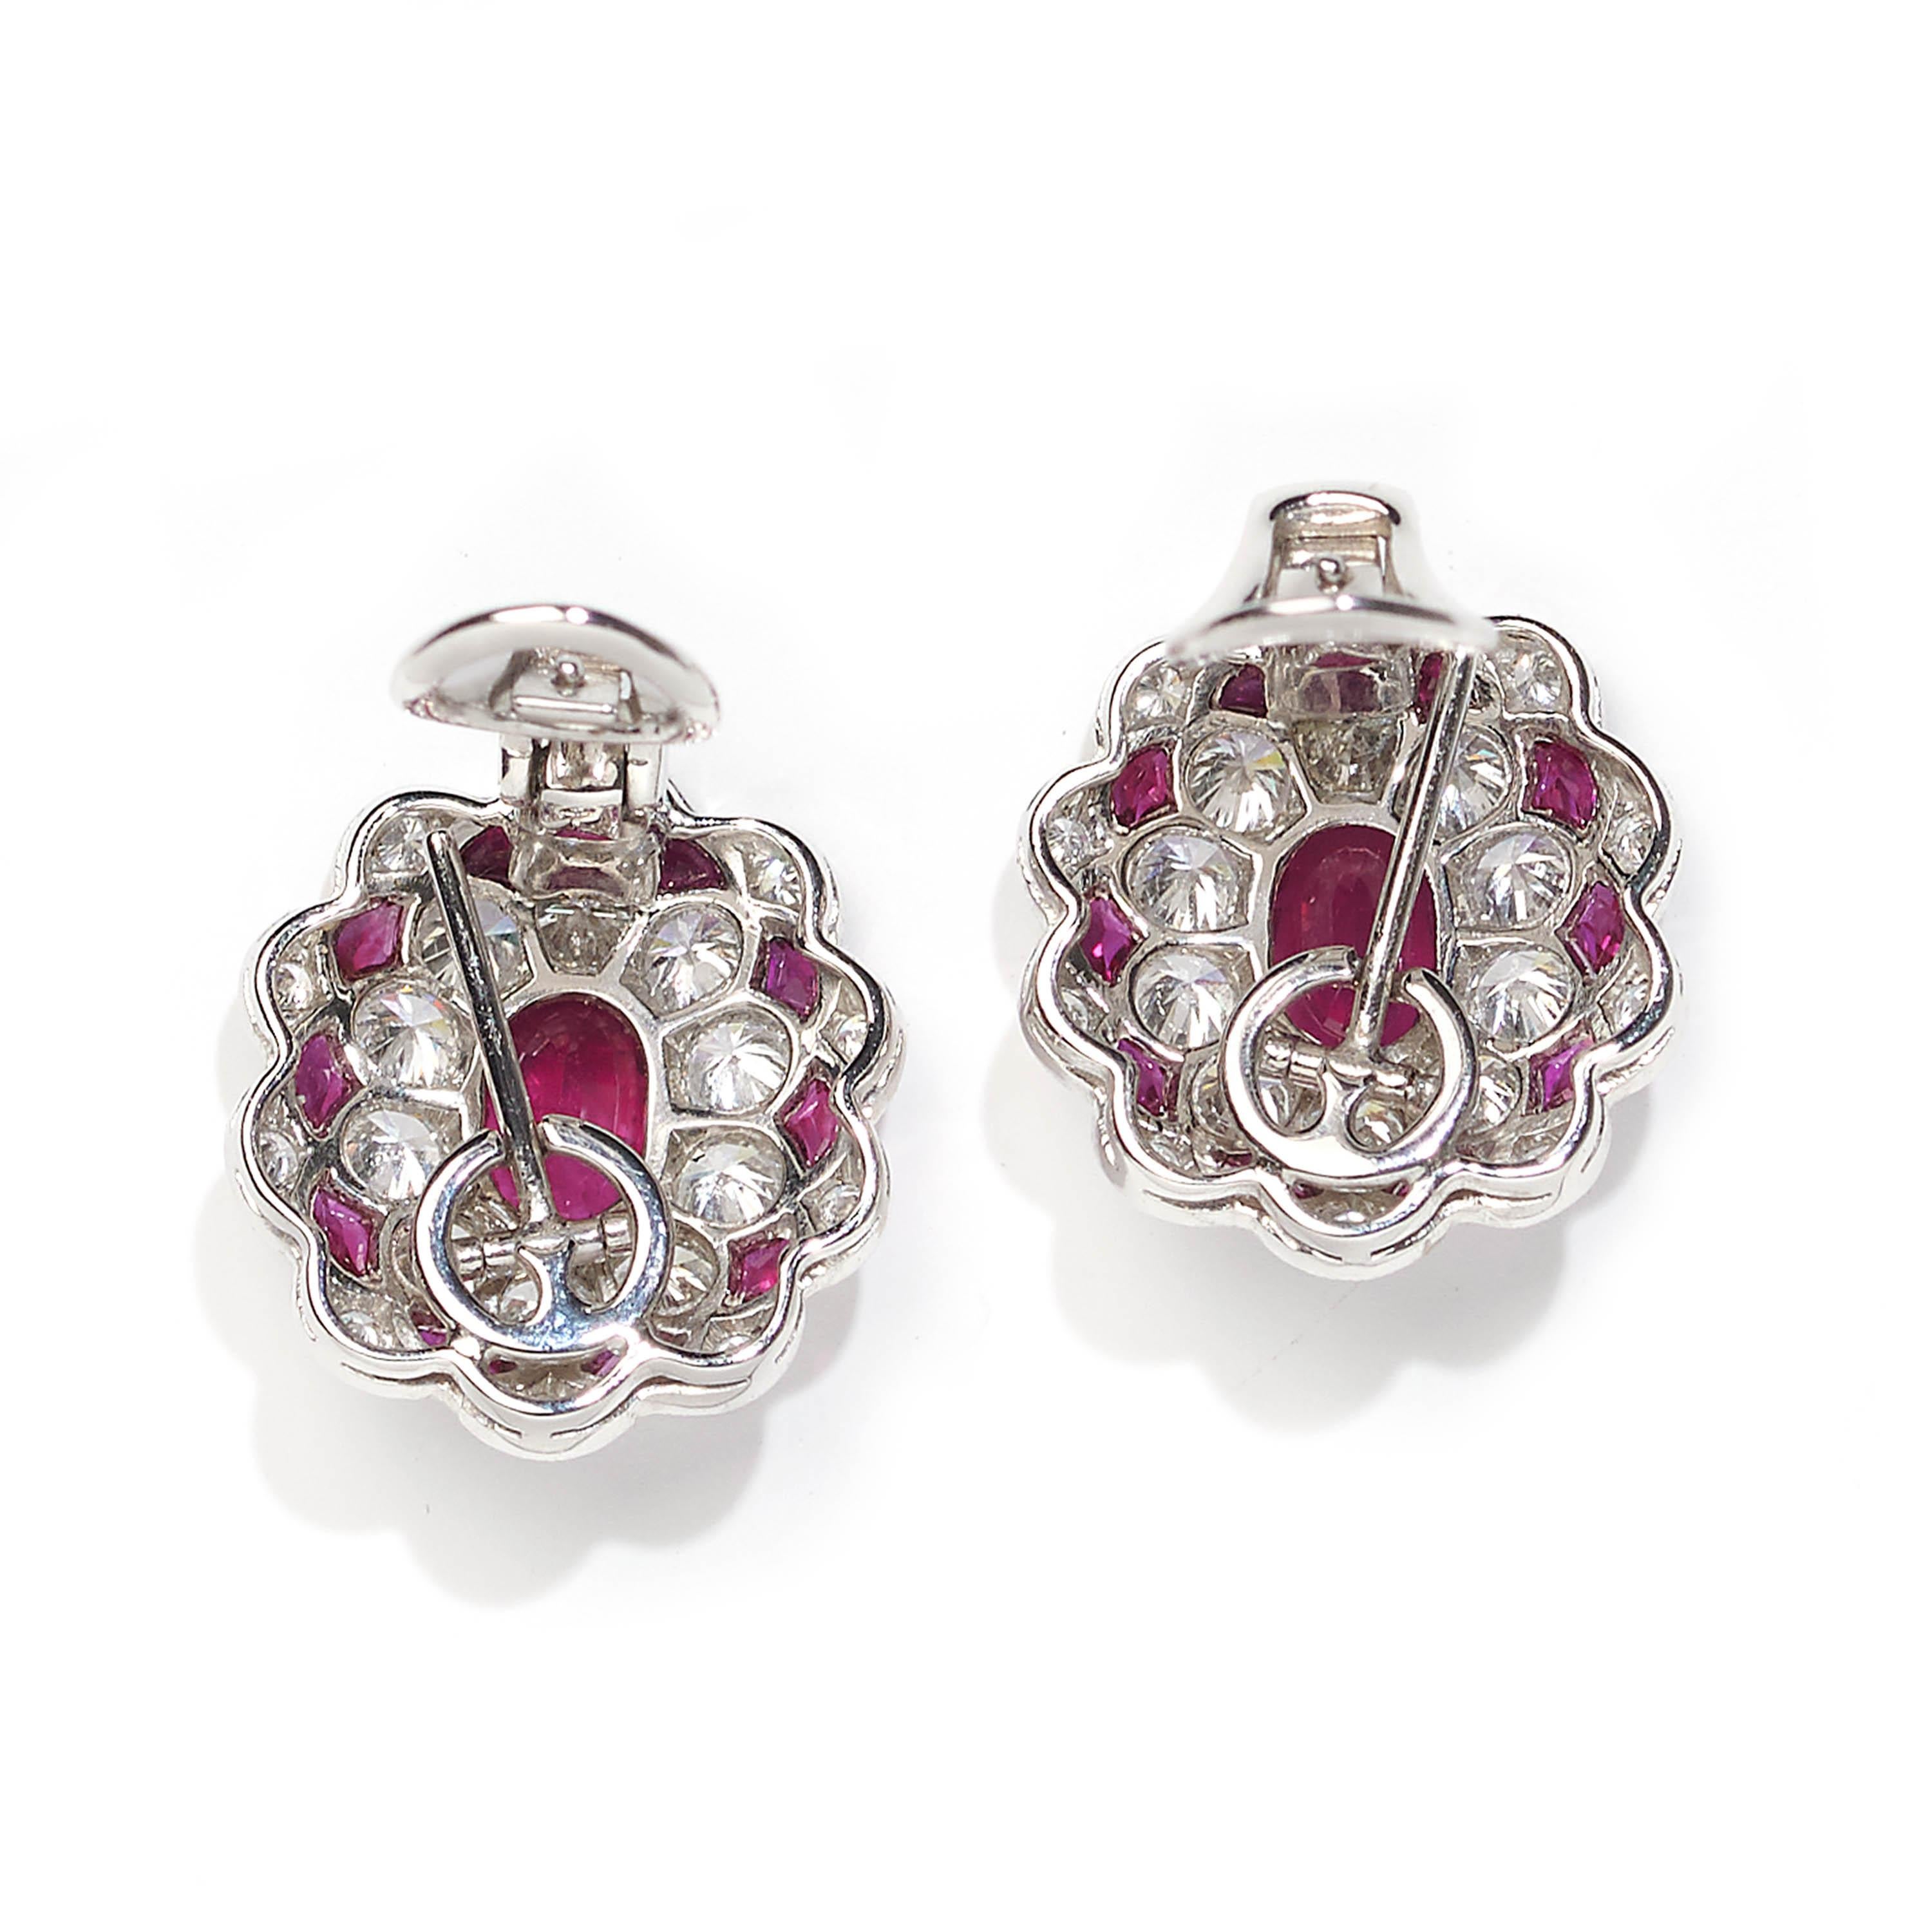 A pair of modern cluster earrings, set with oval rubies weighing a total of 2.51 carats, surrounded by fancy-cut rubies weighing a total of 0.81 carats, and round diamonds weighing a total of 2.71 carats, with posts and hinged clip fittings, mounted